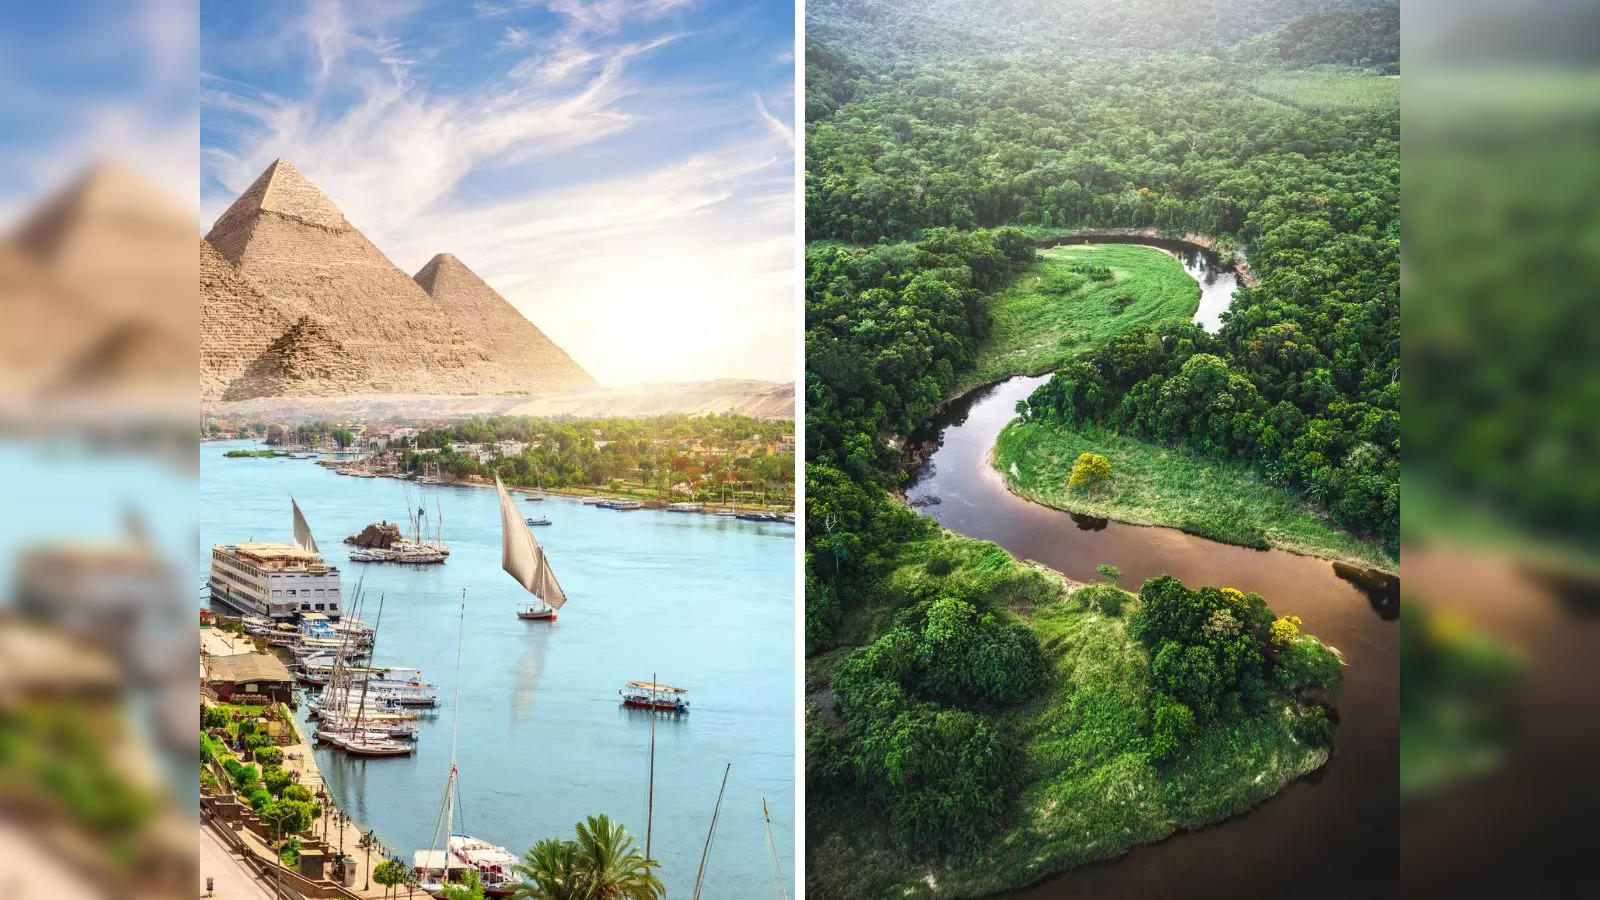 The River Nile's greatest attractions from Aswan to Luxor | CNN